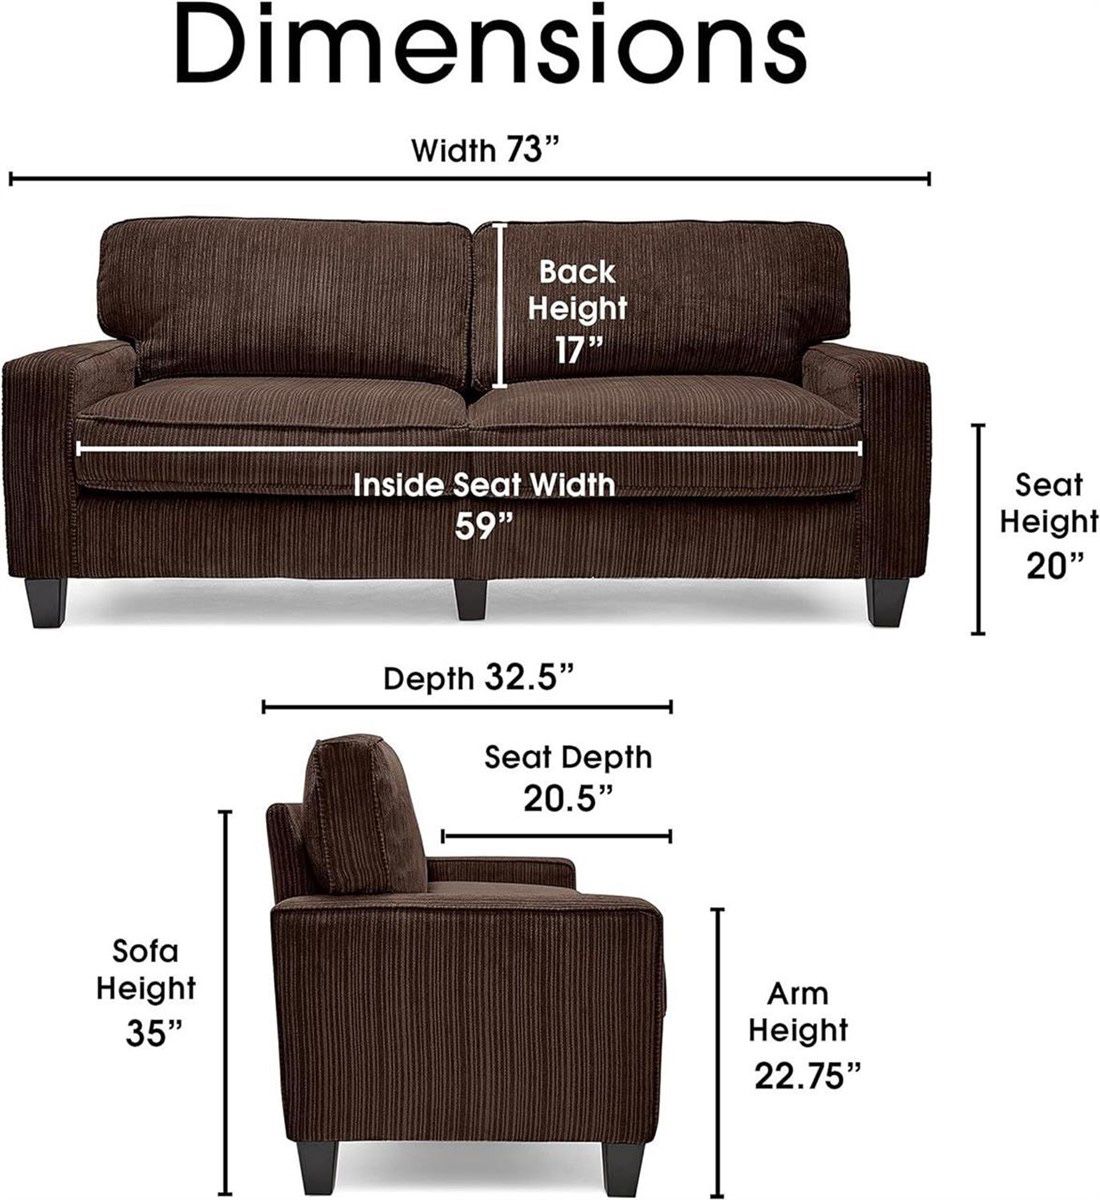 Serta Palisades Upholstered Sofa 73” for Living Room Modern Design Couch, Straight Arms, Soft Fabric